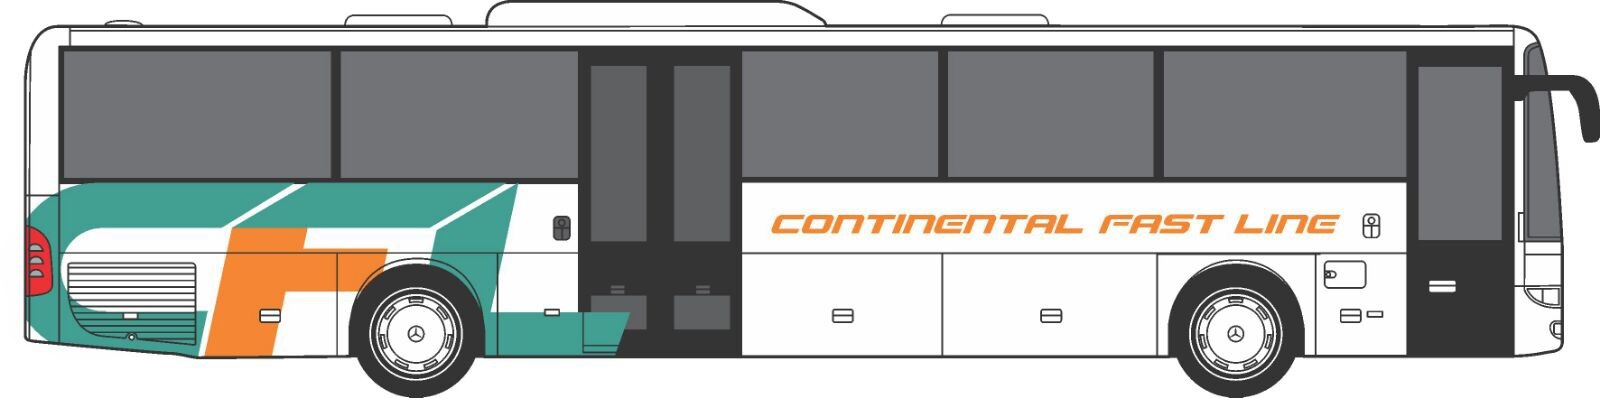 CONTINENTAL FAST LINE S.R.L. undefined: صورة 2